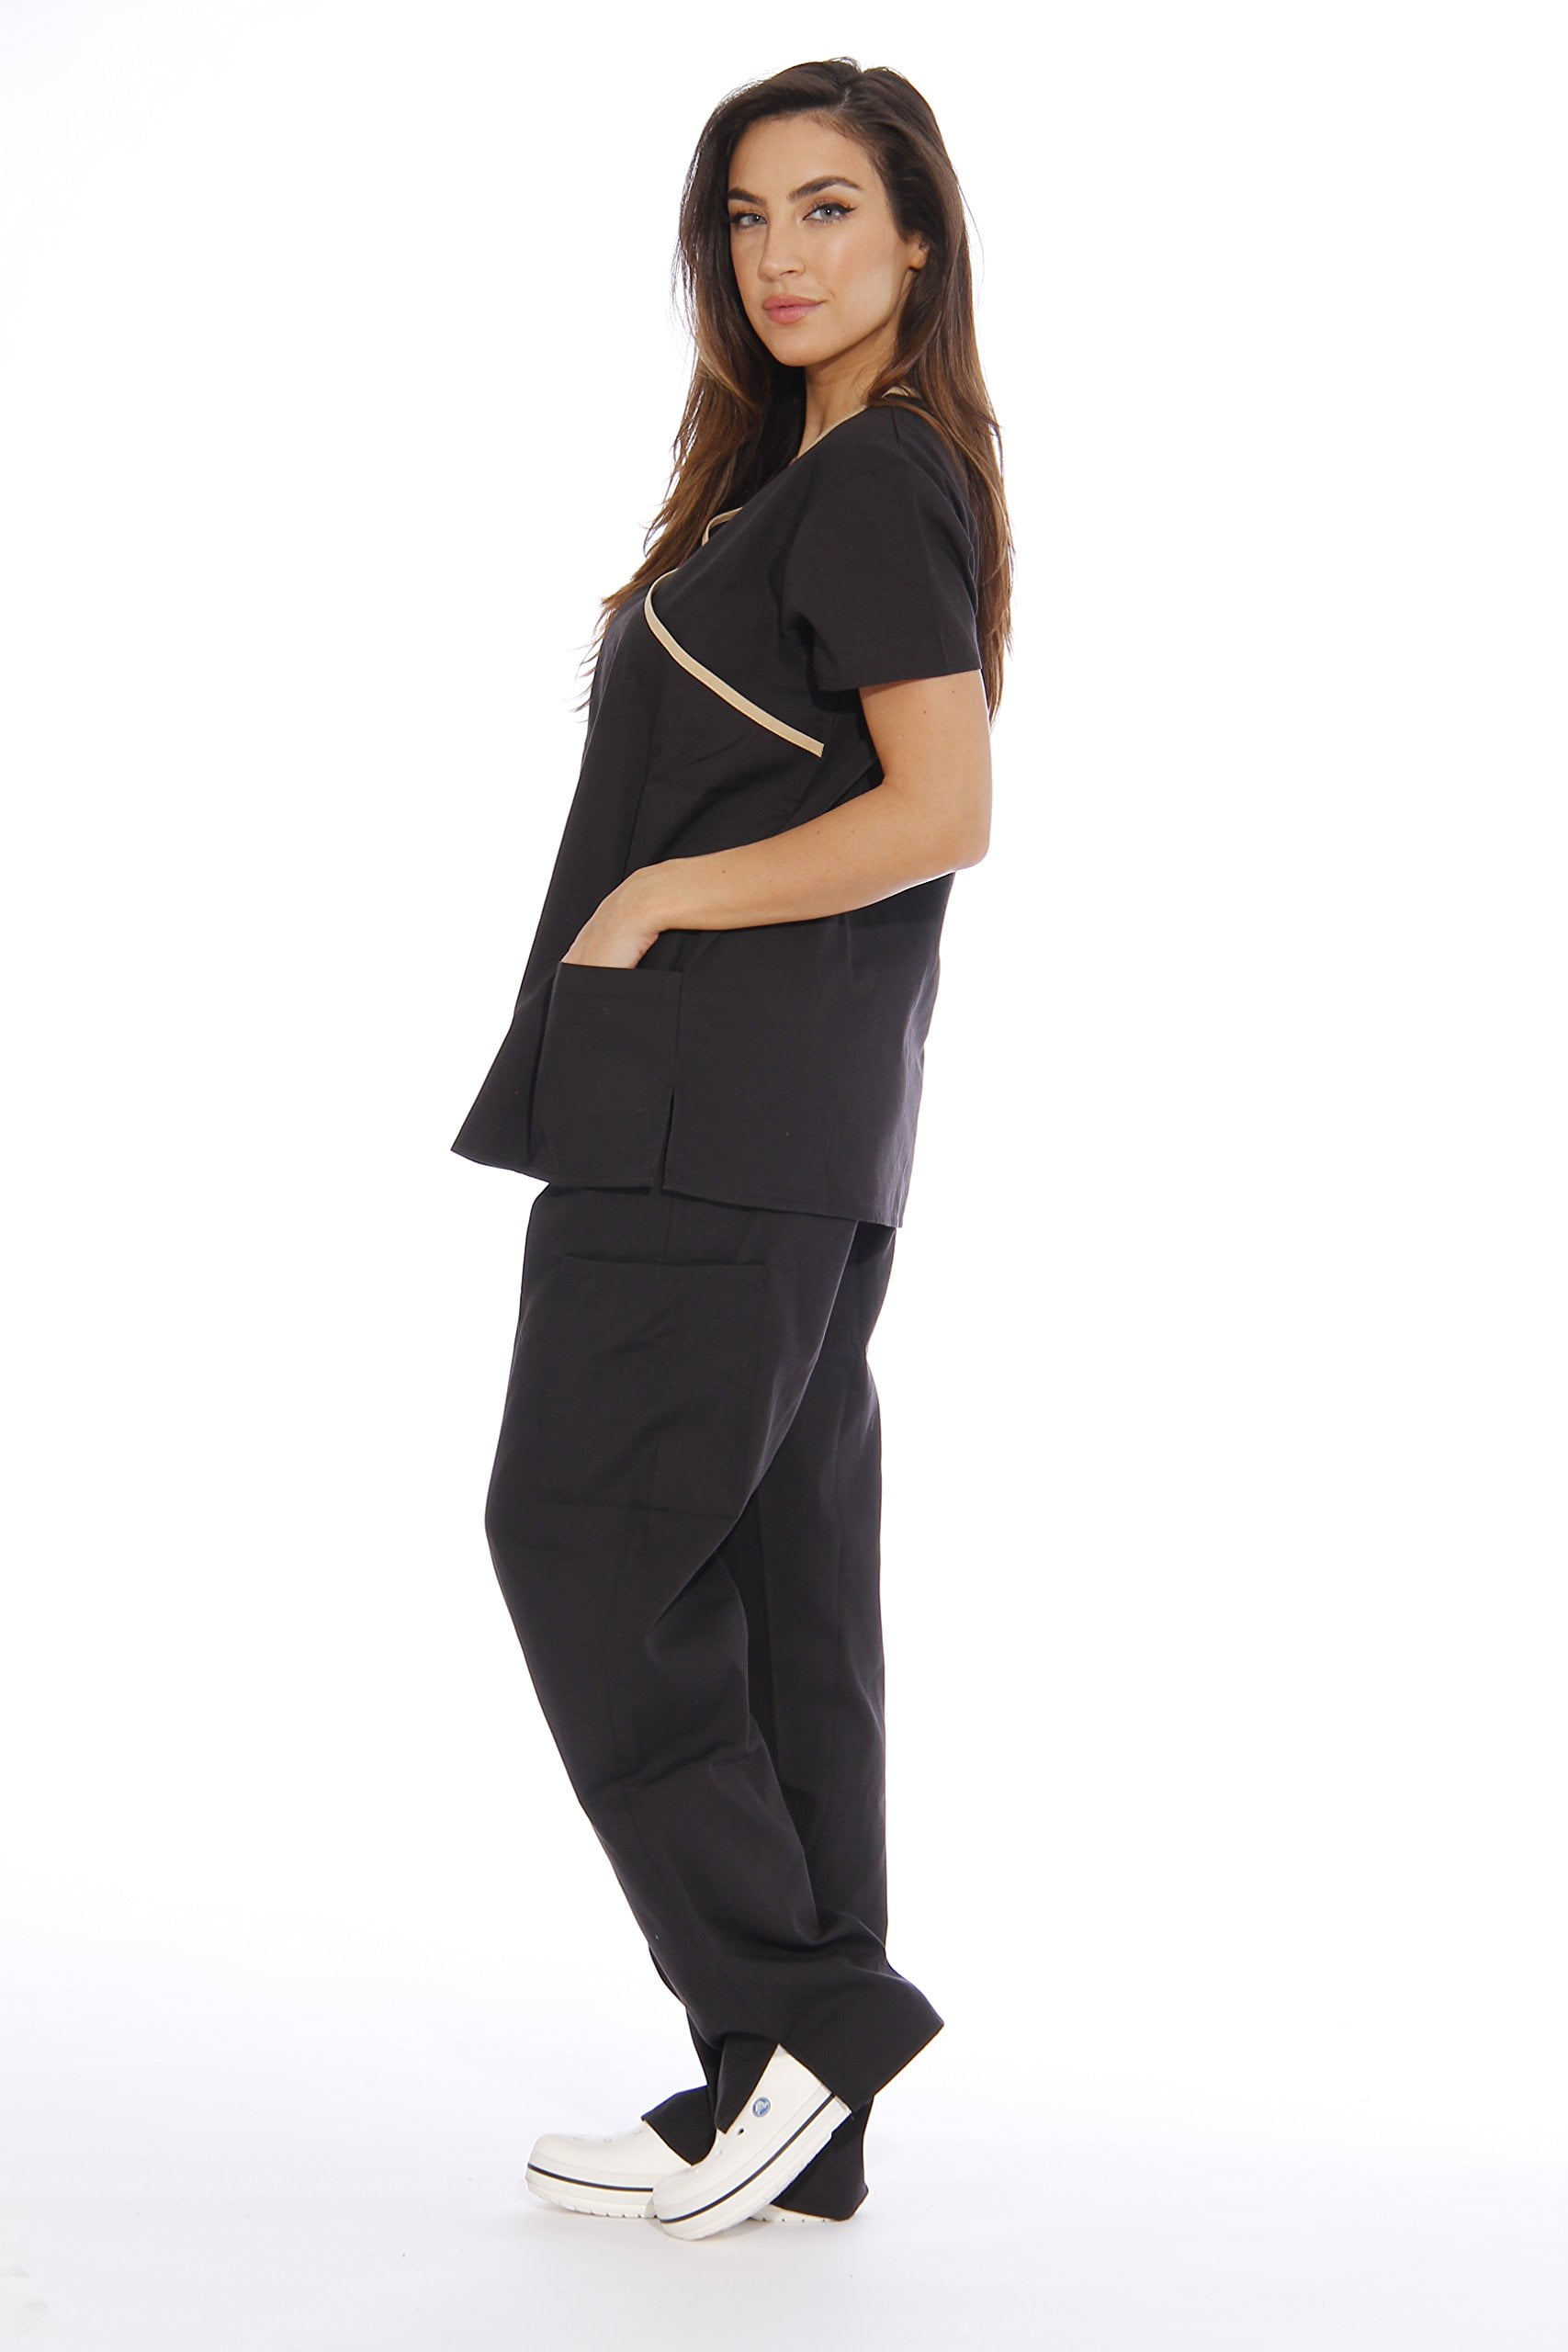 USFW ScrubStore - Adorable Scrubs for Compassionate